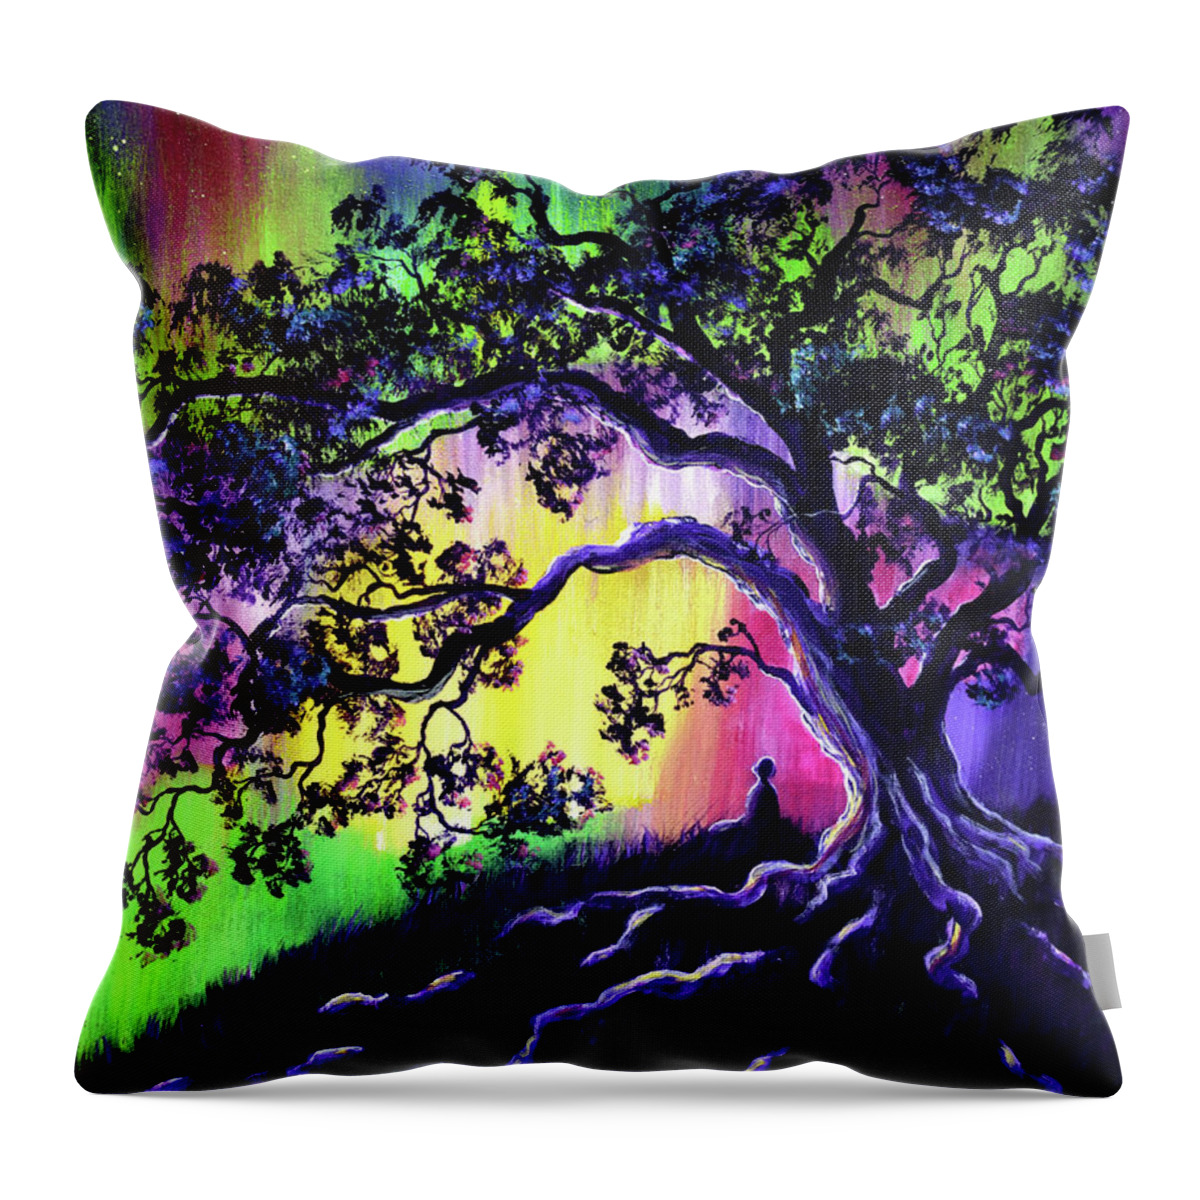 Colorful Throw Pillow featuring the painting Aurora Borealis Tree of Life Meditation by Laura Iverson